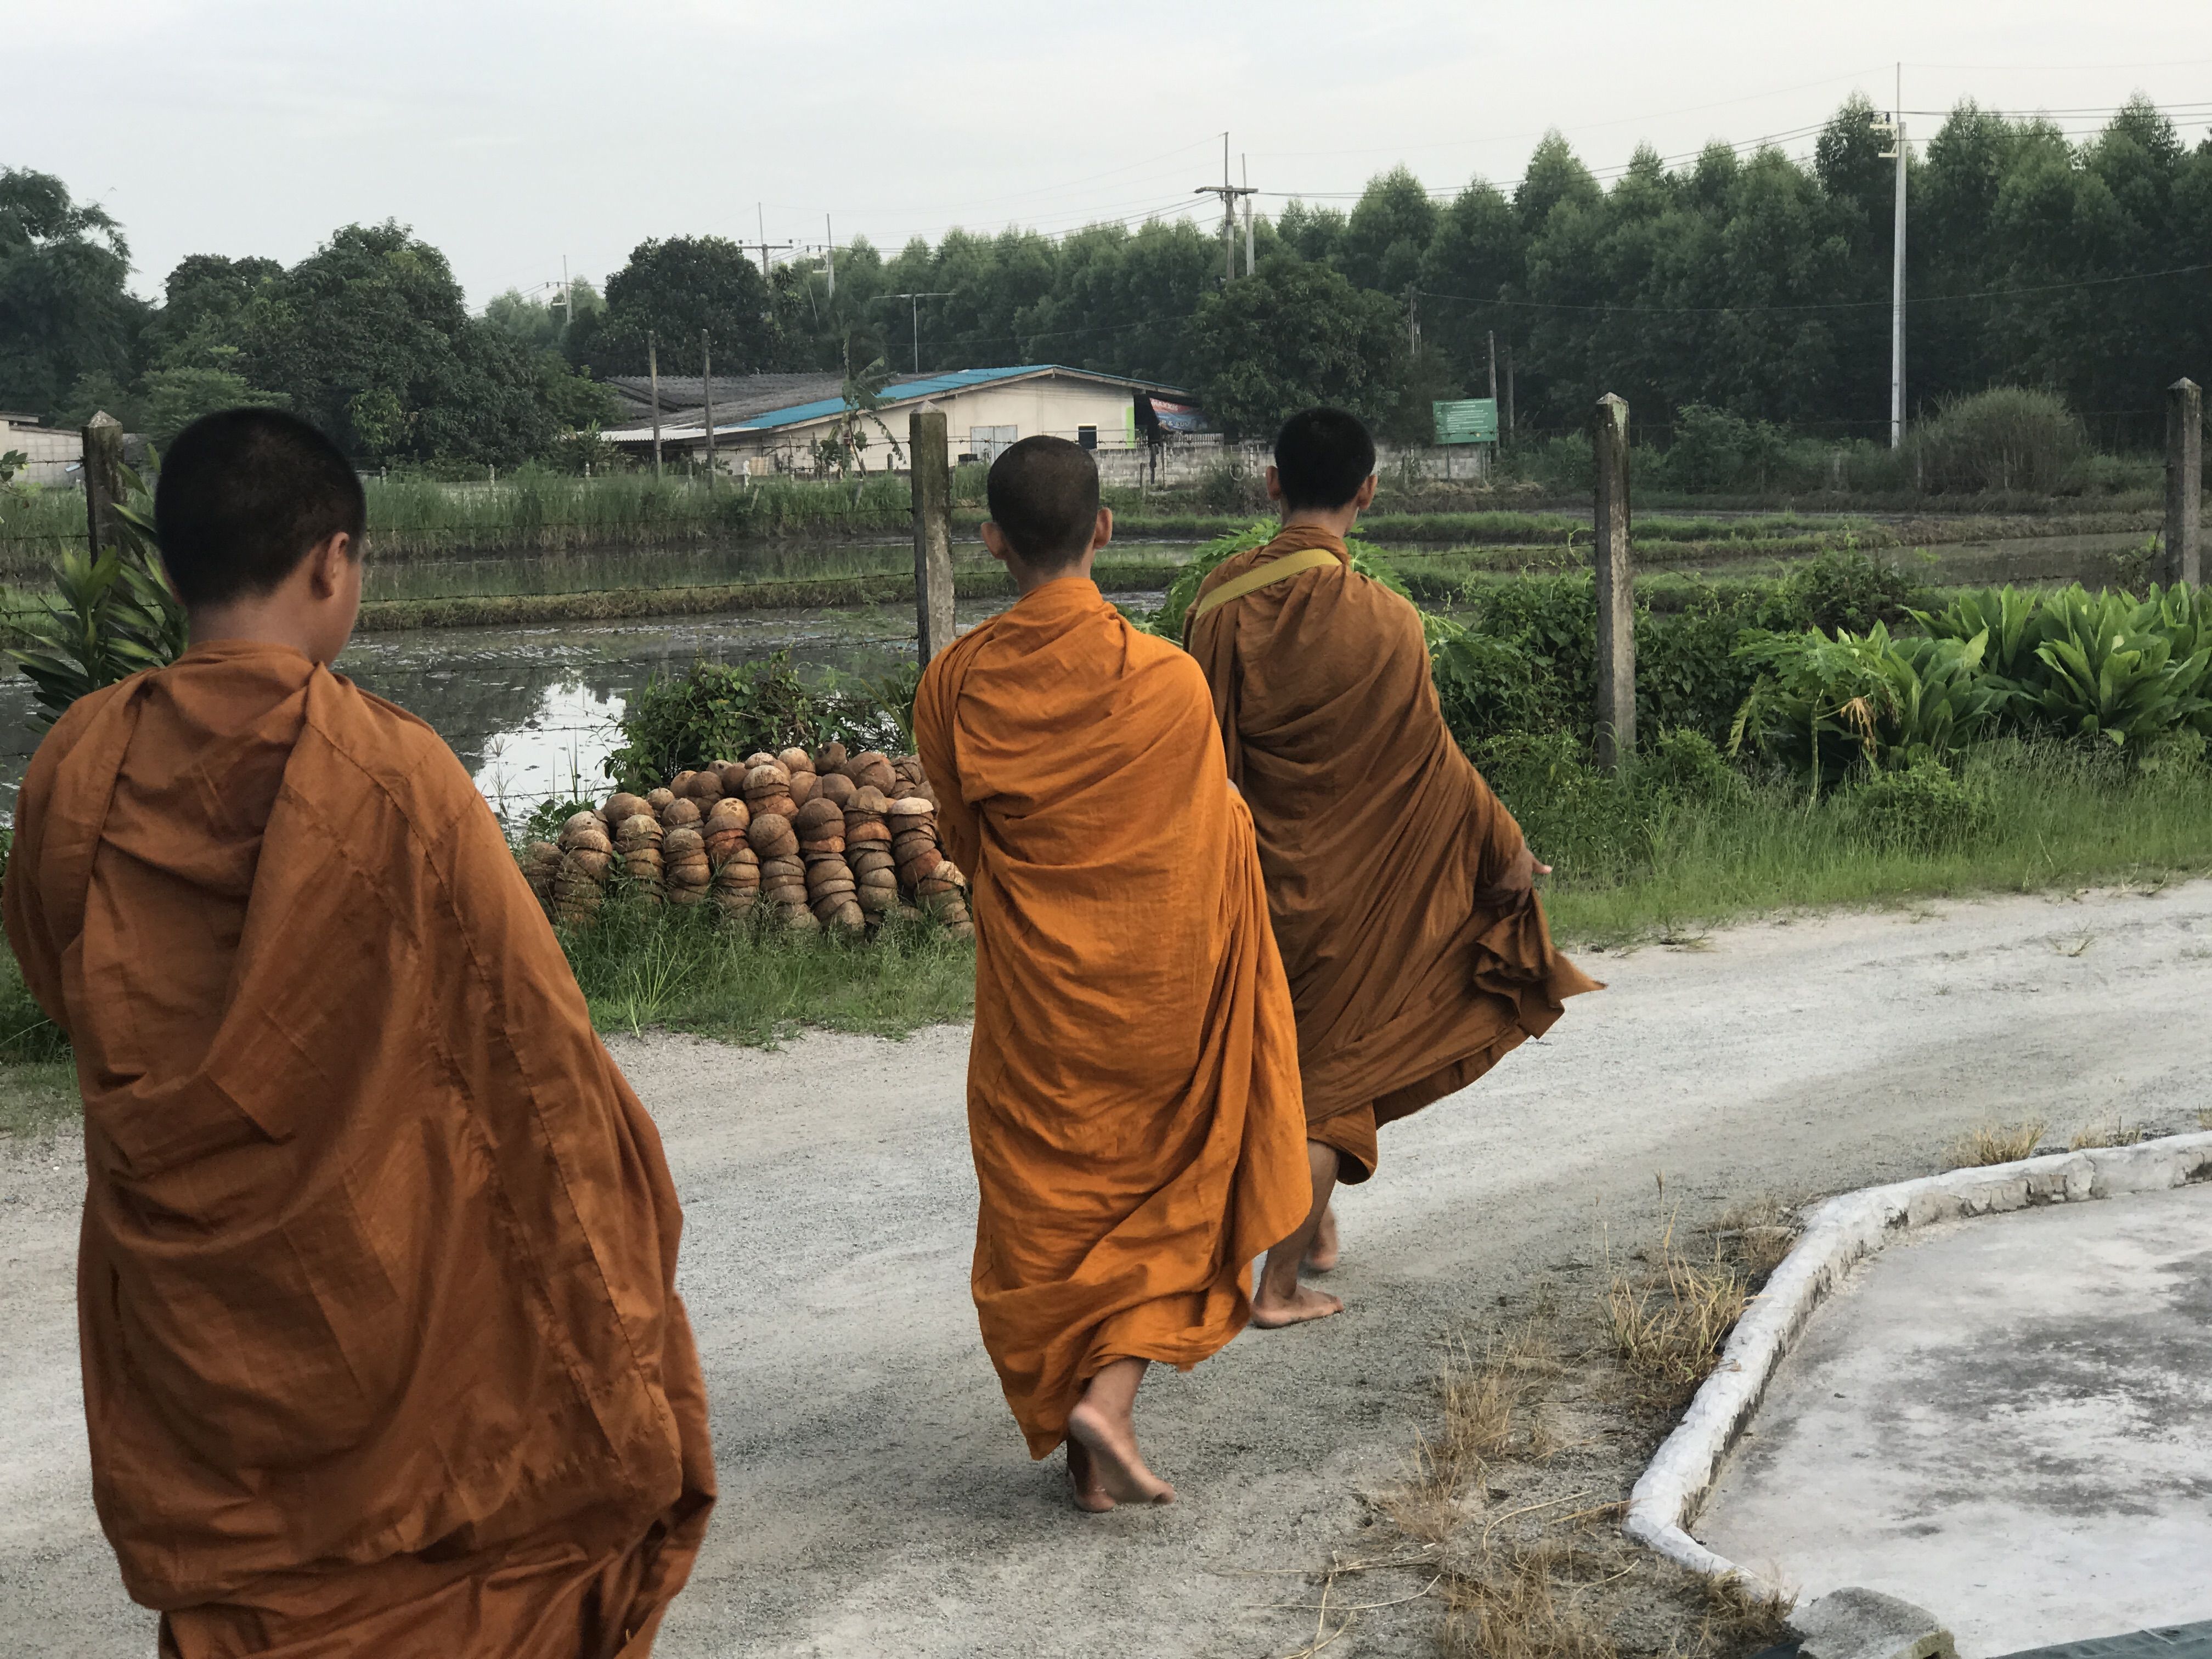 Three young monks collect morning alms in the Chonburi Province of Thailand. Image by Kiley Price. Thailand, 2018.